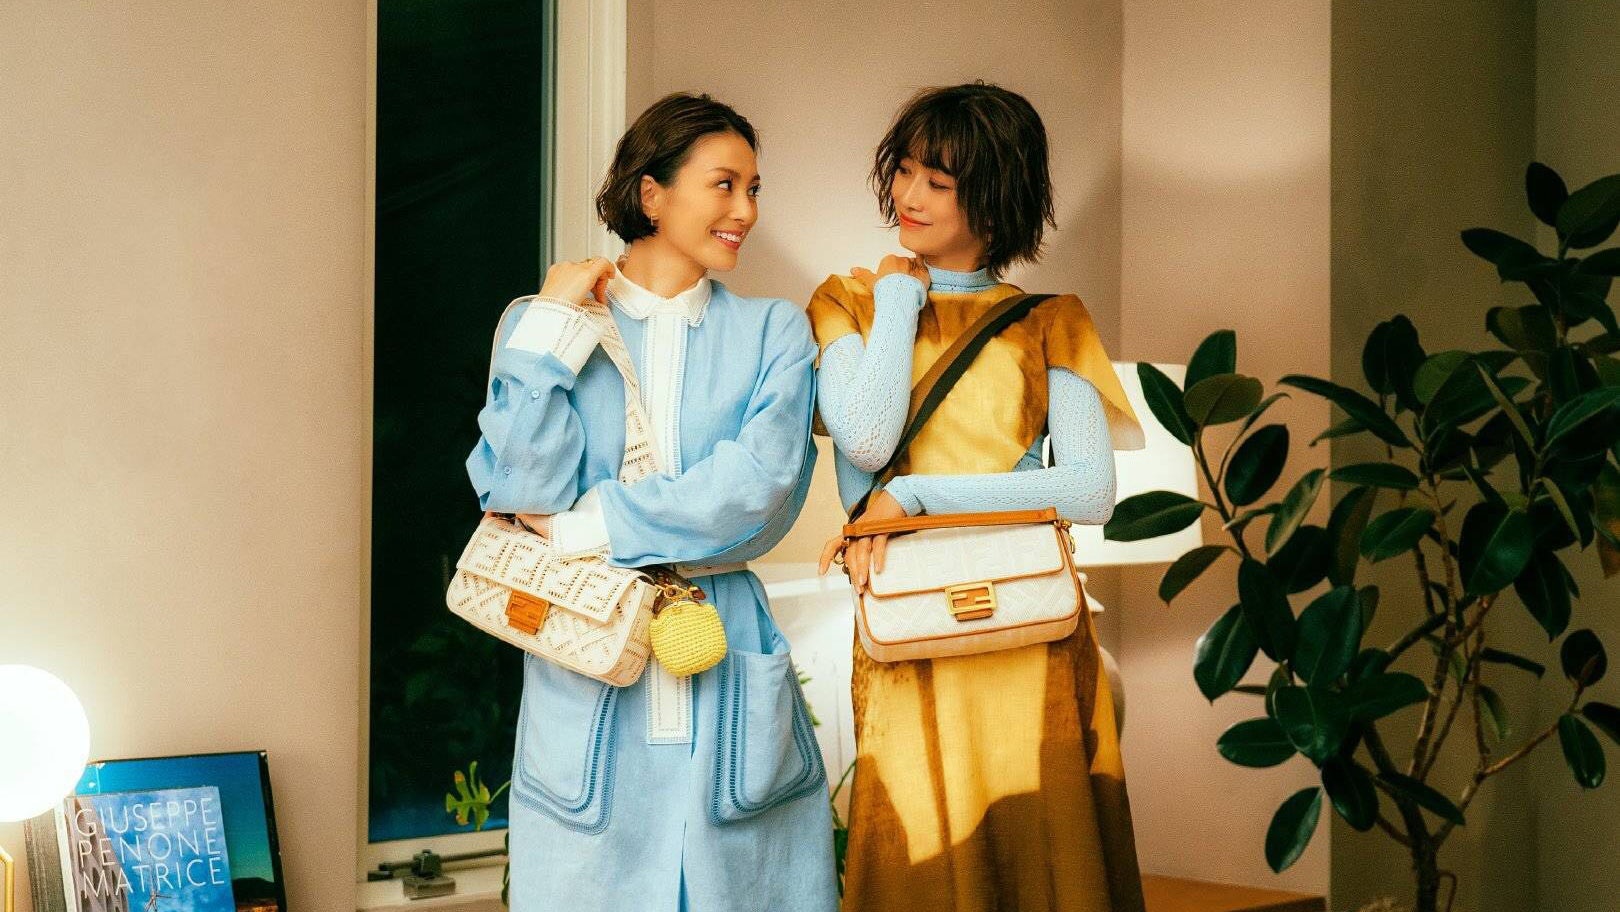 With brands doing all they can to avoid celebrity scandals, China announces further regulations for endorsements. From socialism to due diligence, here’s what luxury needs to know when hiring VIPs. Photo: Fendi